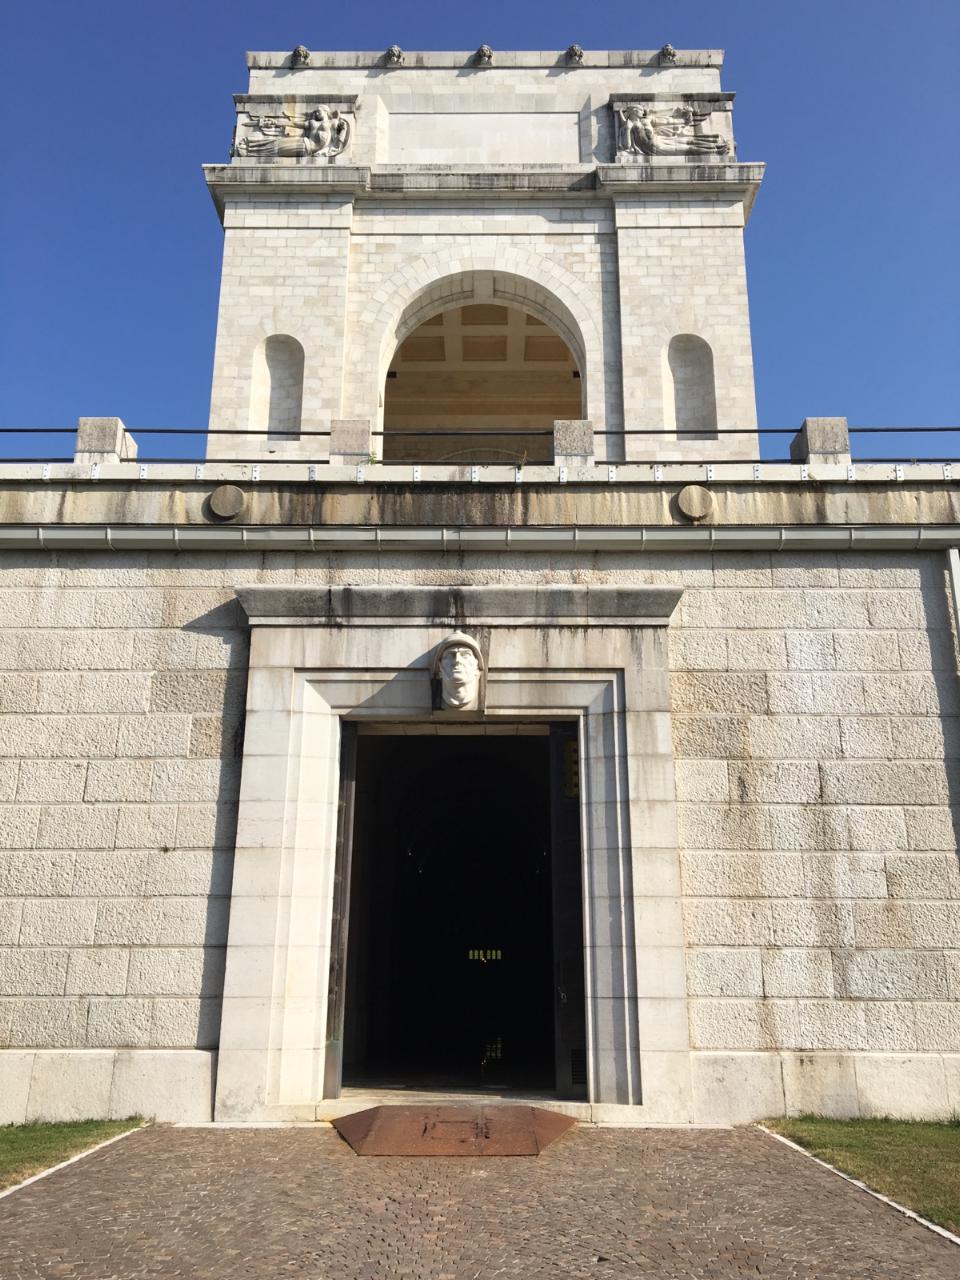 A dark doorway with a rectangular tower rising above it.